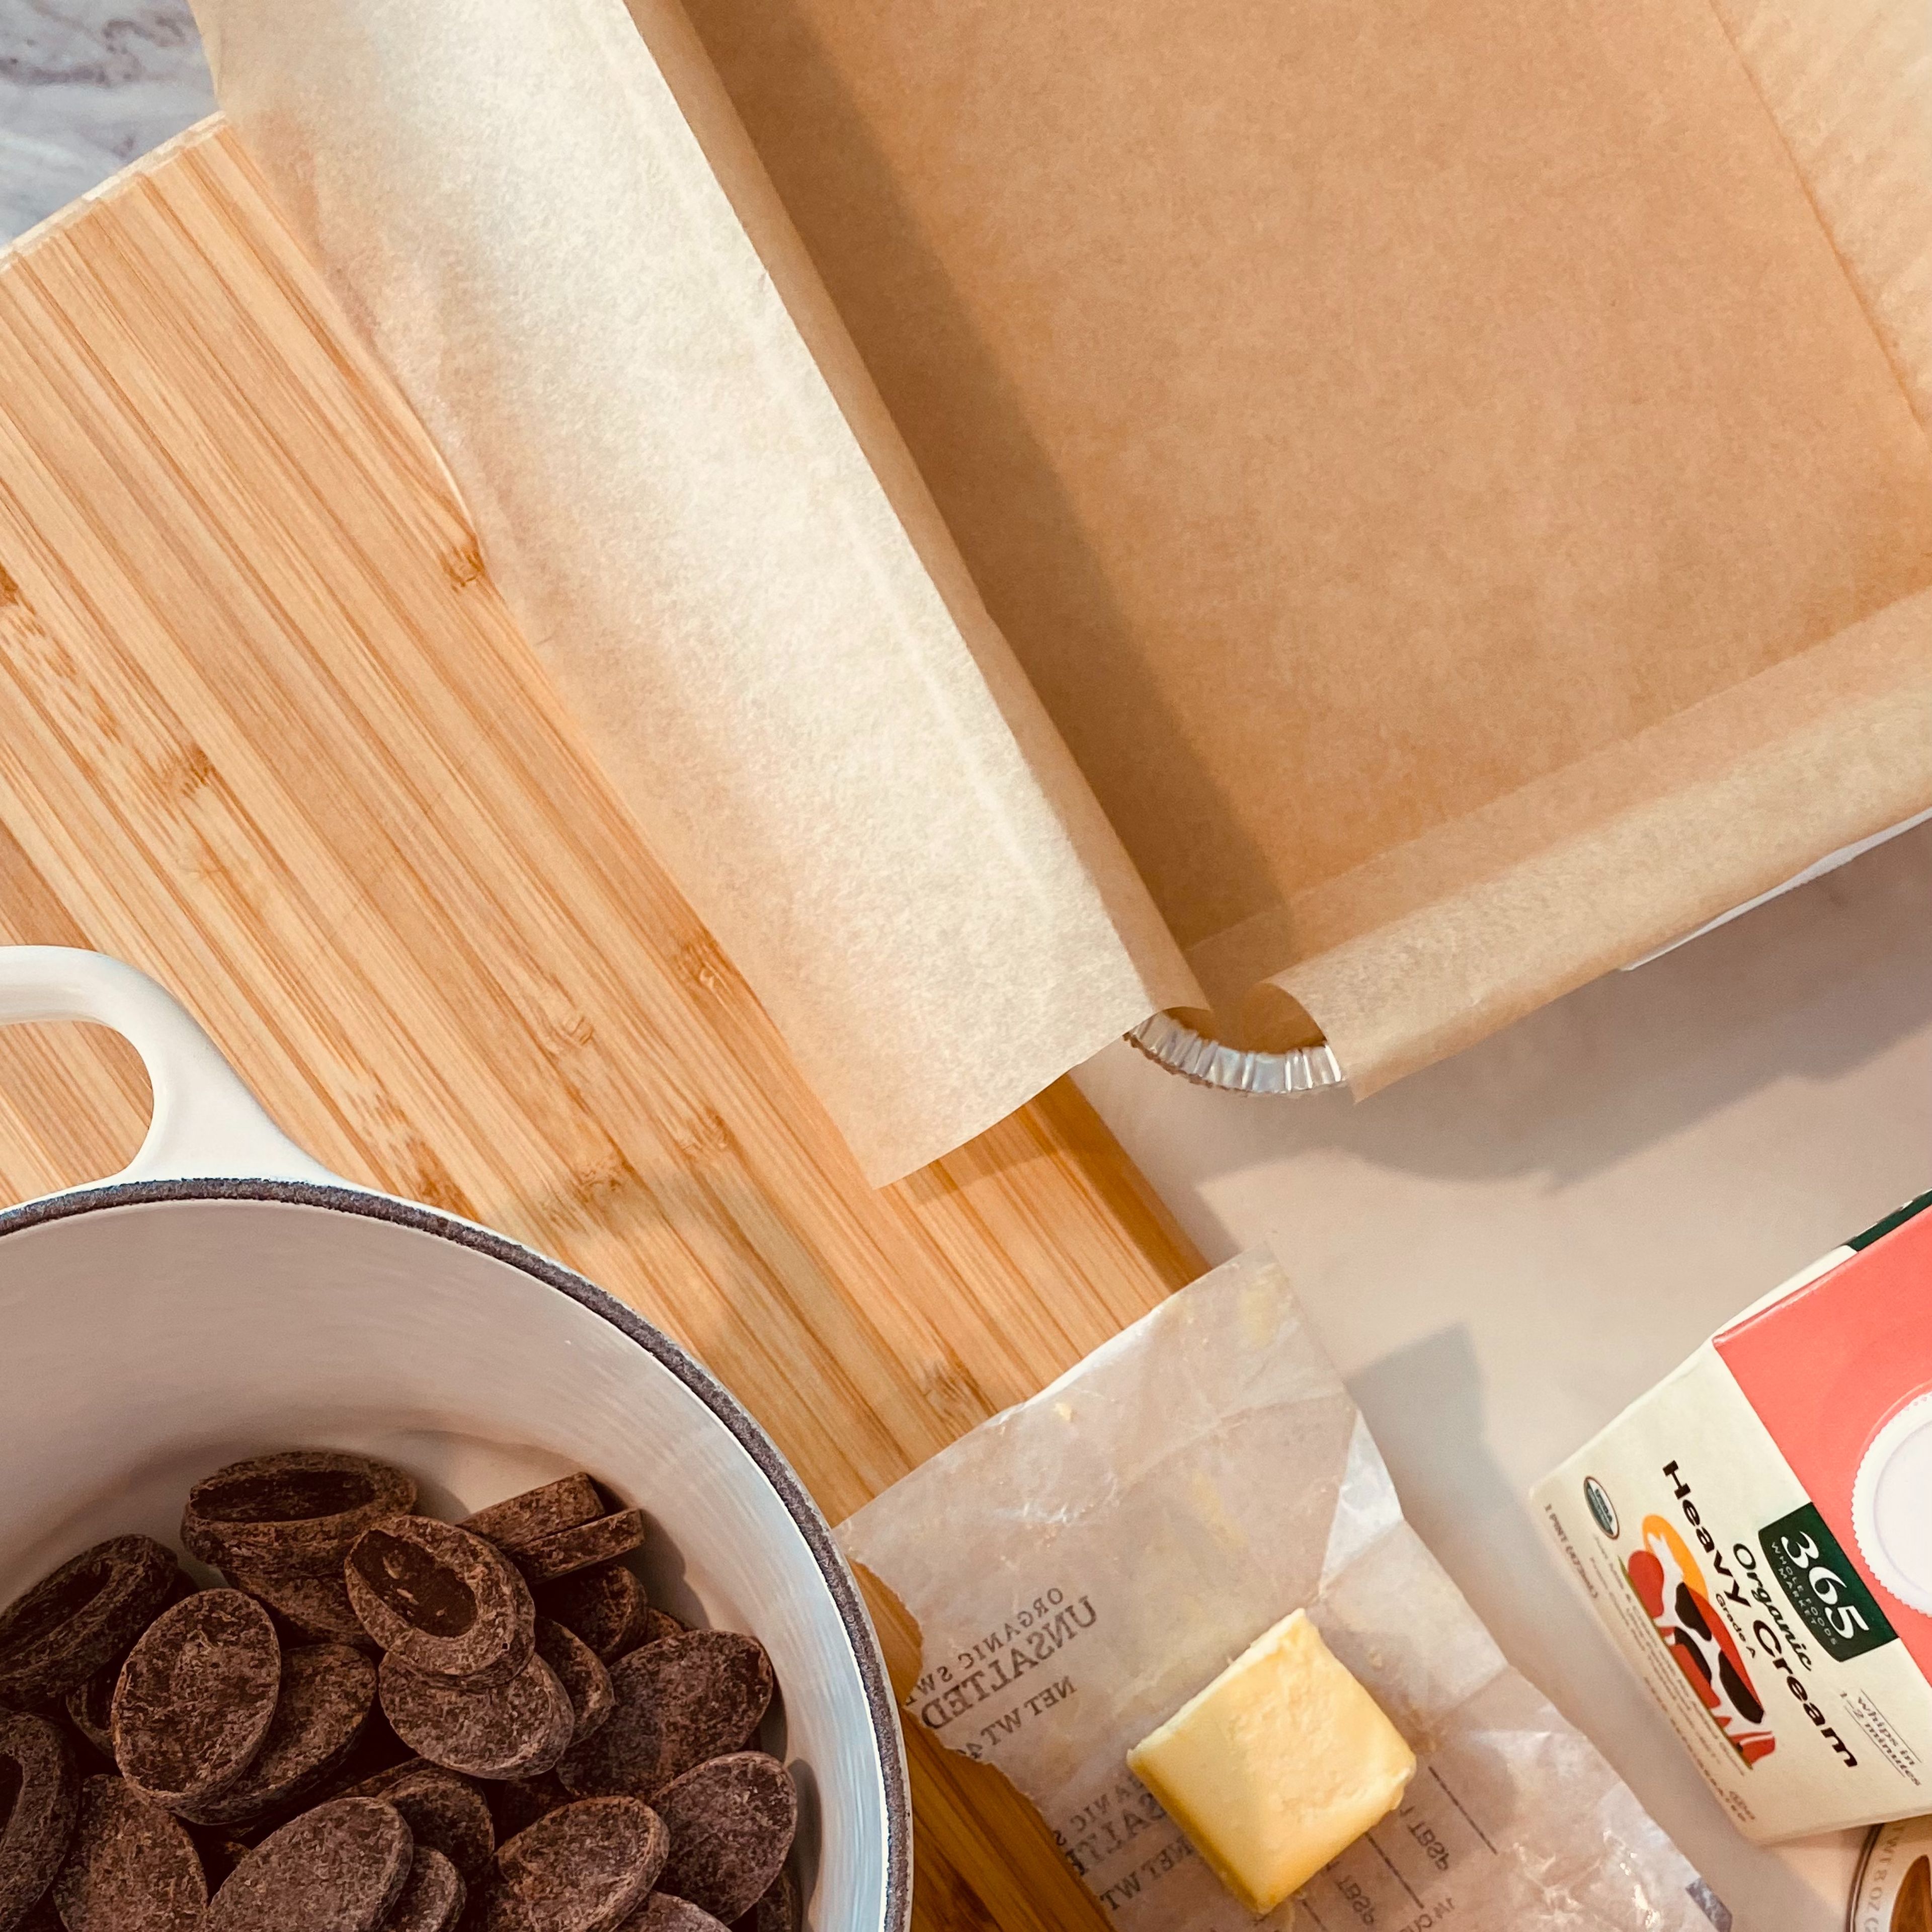 Line a baking tray, or any type of square case with parchment paper. Make sure to cut the parchment paper long enough to cover the sides and edges, so you can remove the chocolate easily.